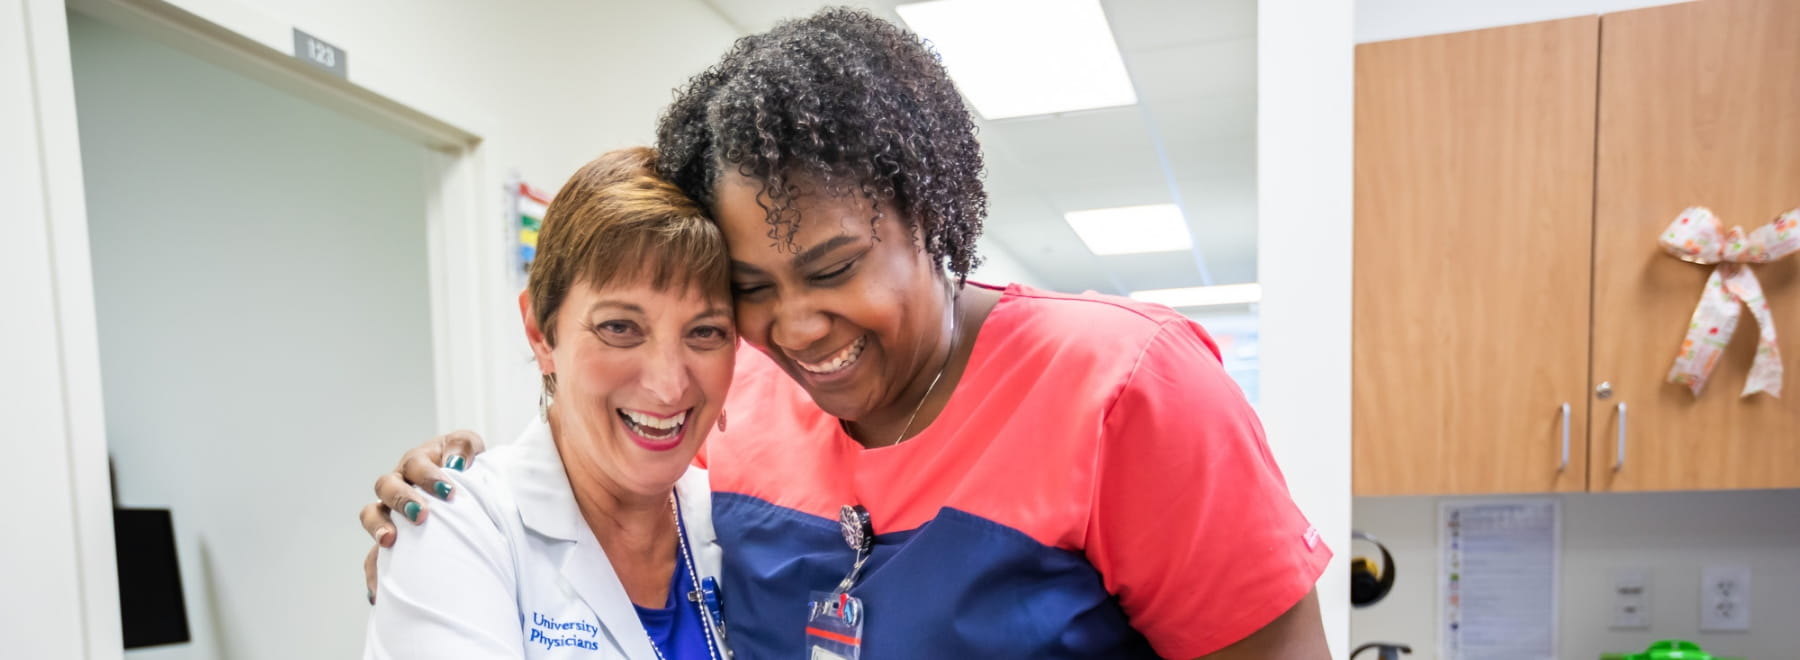 Female physician and female nurse smile while hugging next to a nurses station